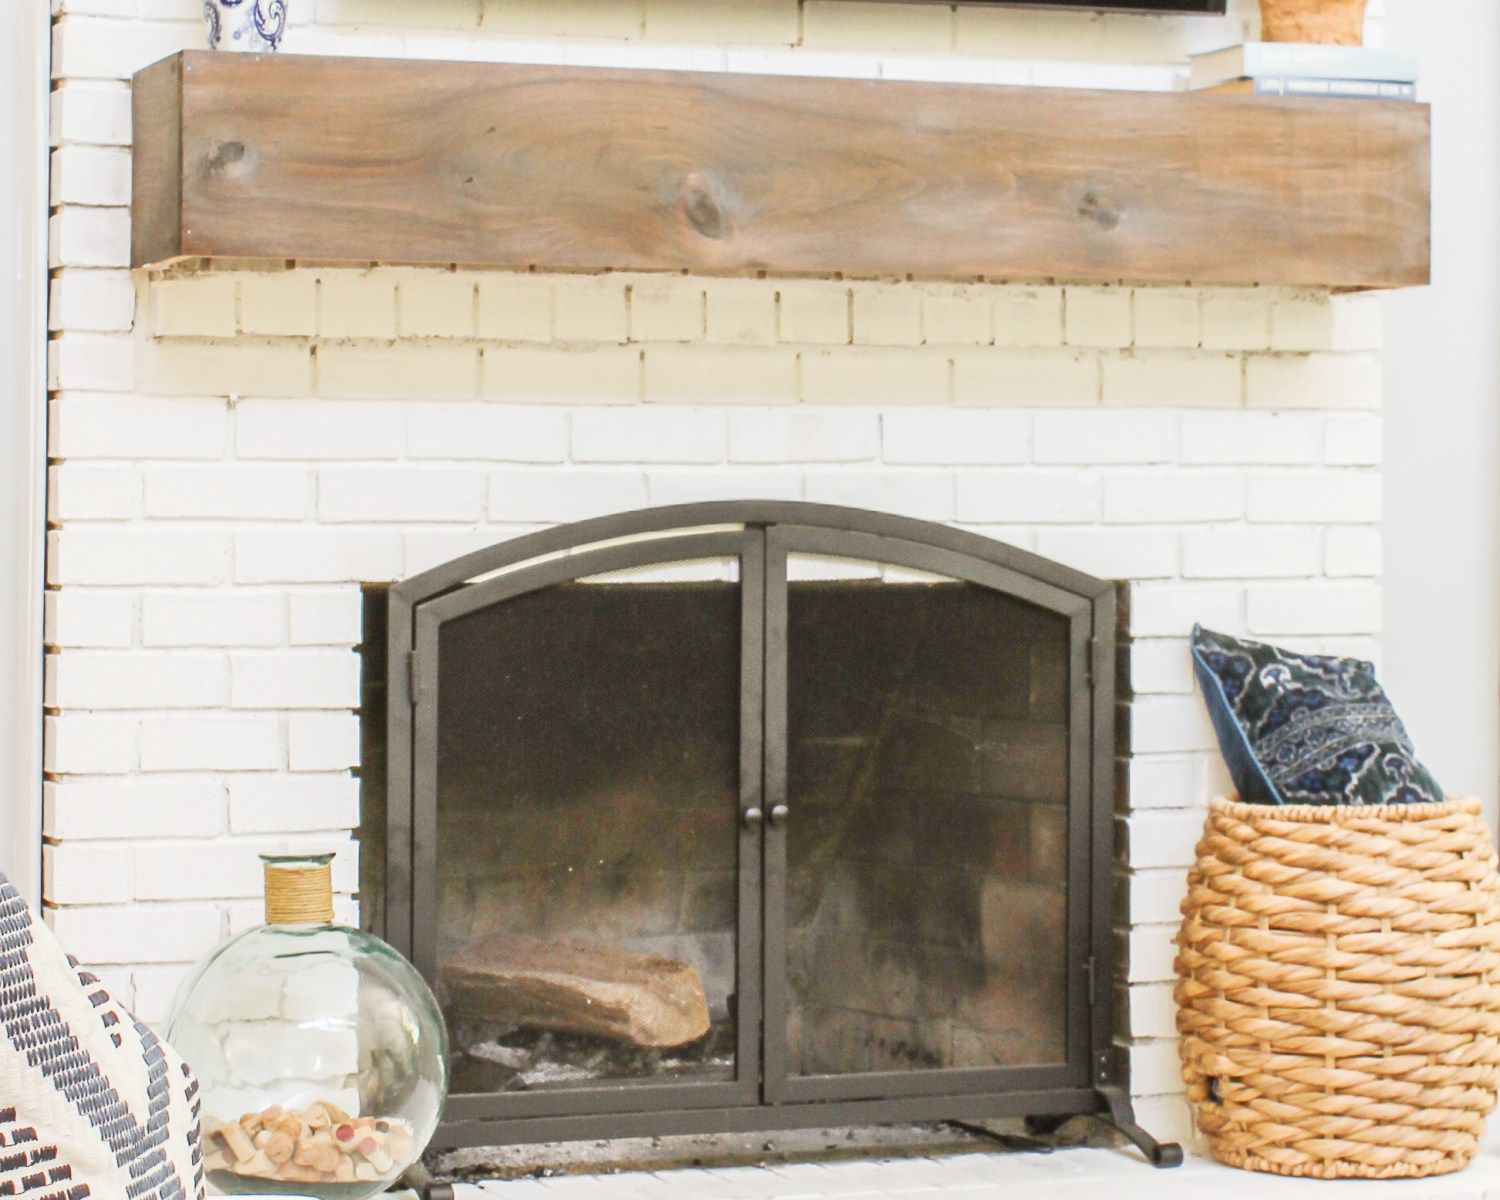 How to Mount Tv On Brick Fireplace Beautiful How to Mount A Tv Over A Brick Fireplace and Hide the Wires